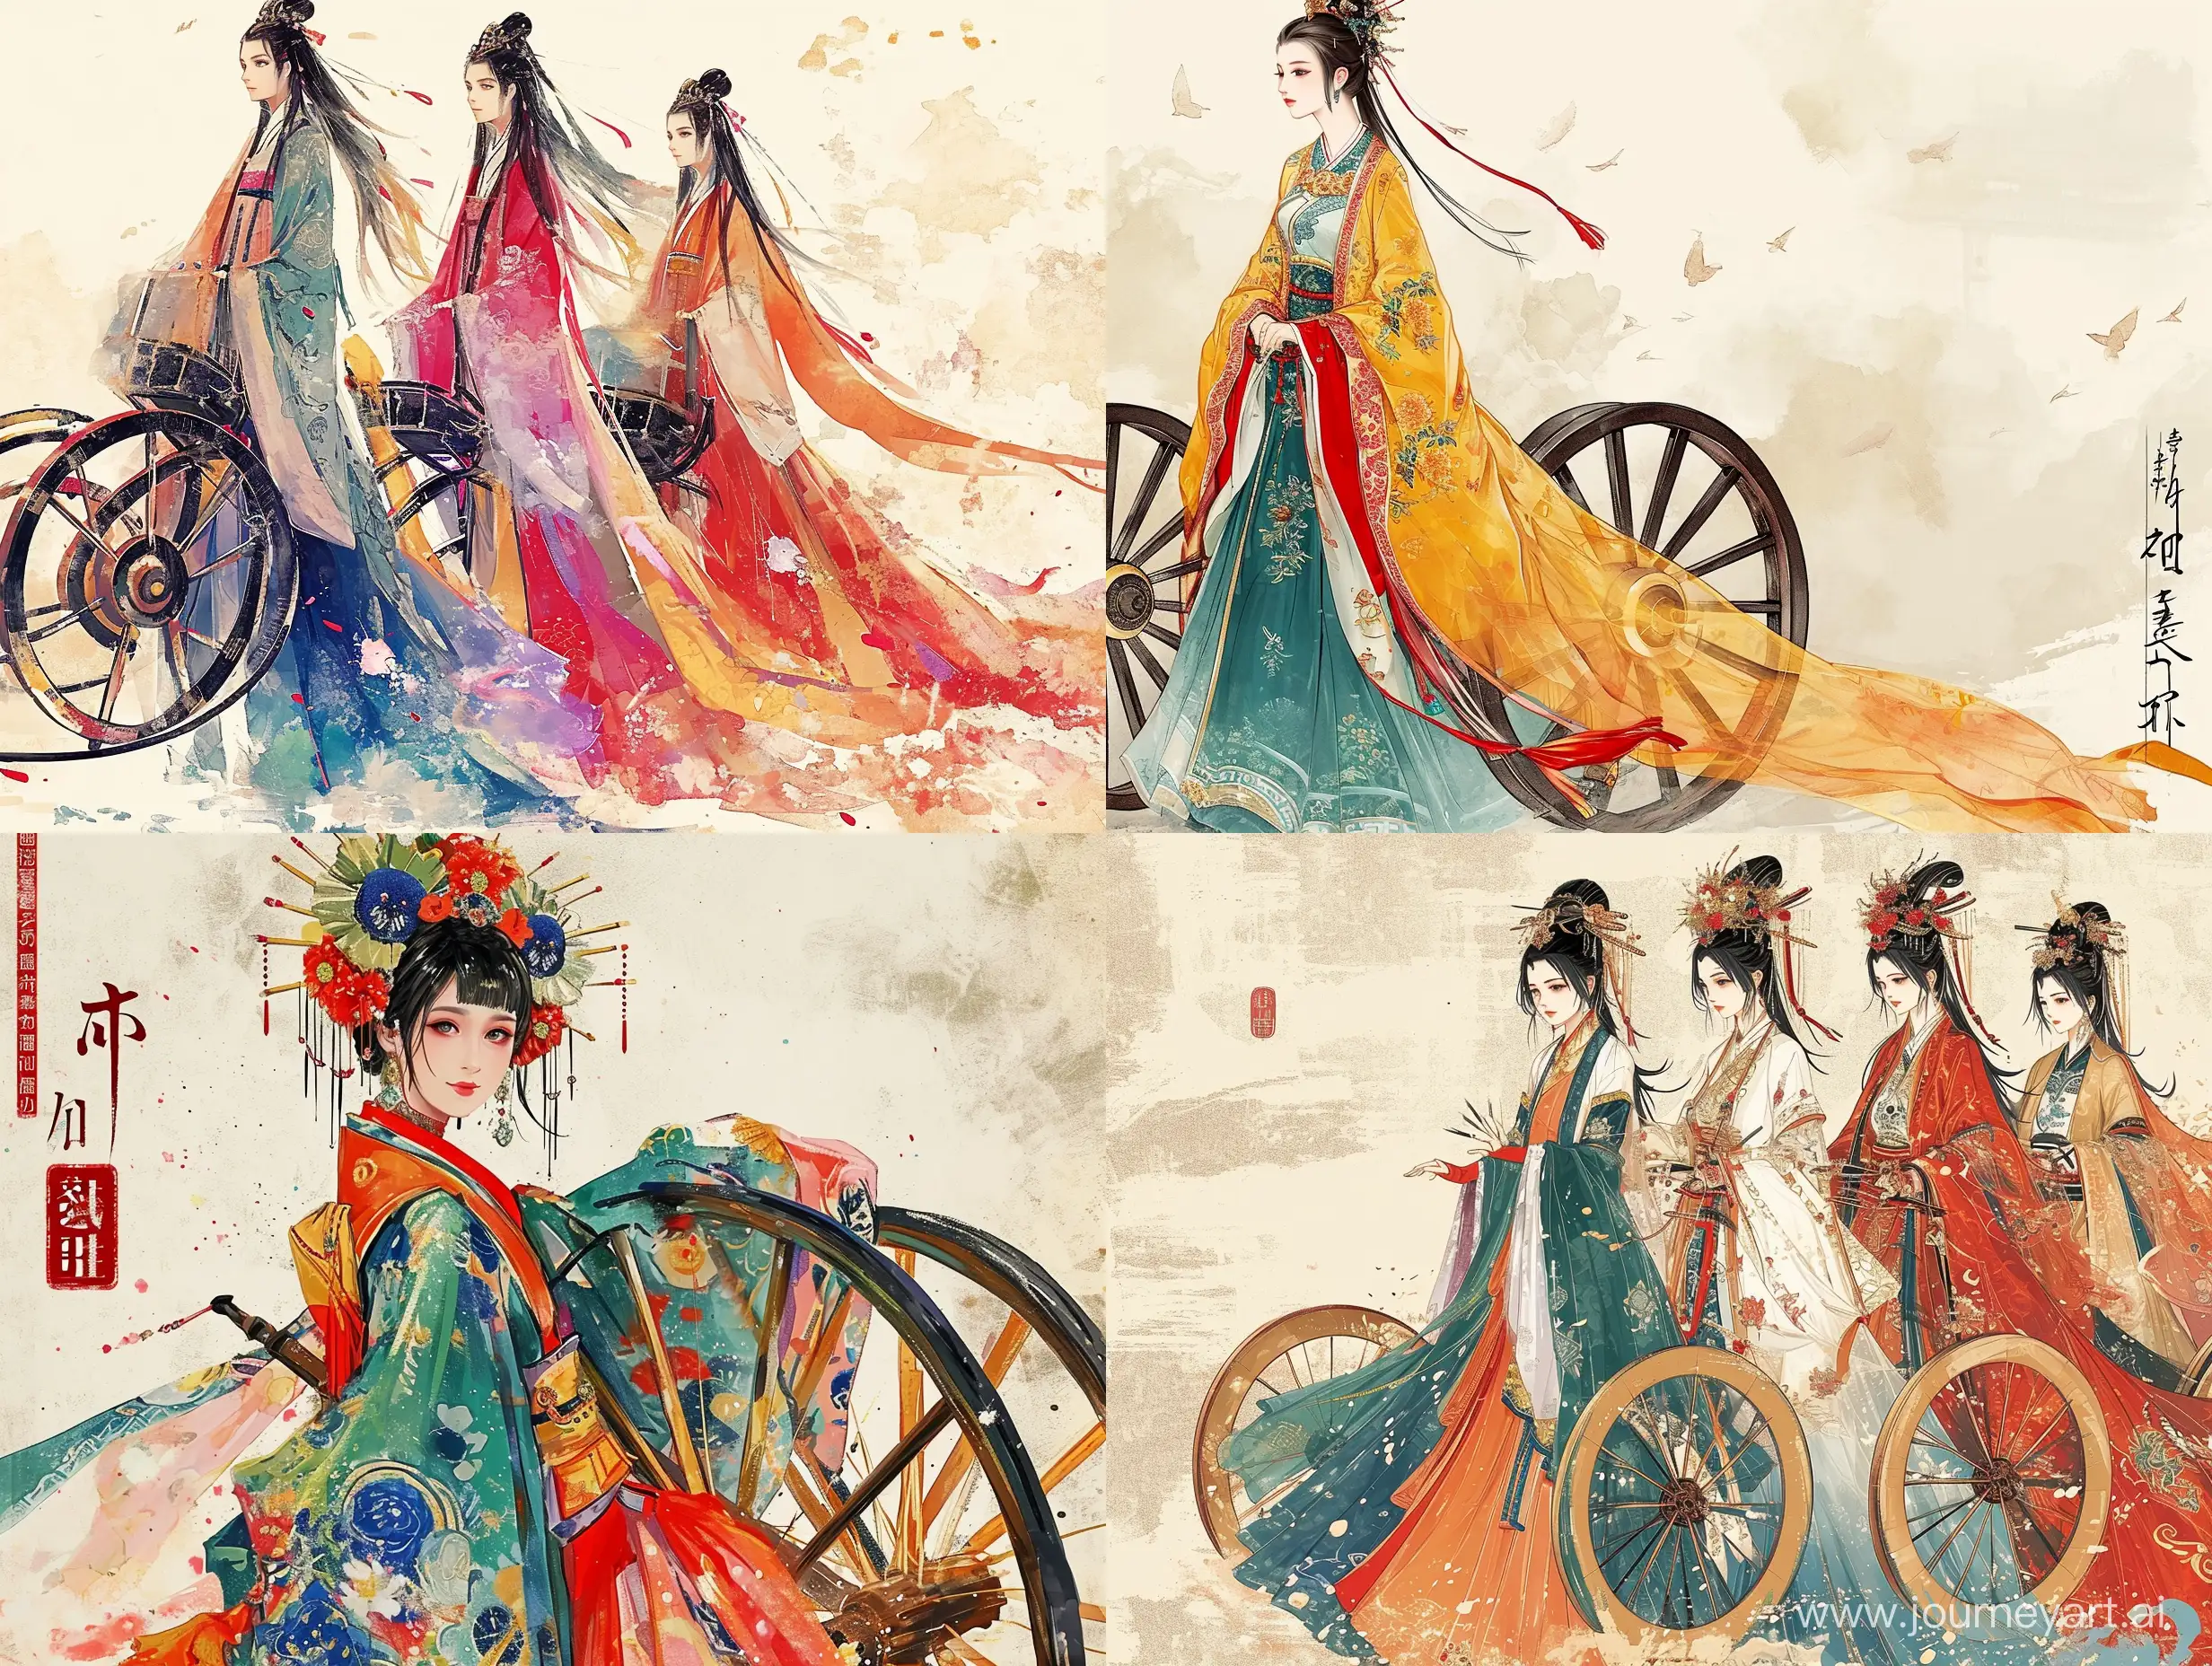 Colorful-Chinese-Style-Manga-with-Splendid-Attire-and-Ancient-Aesthetics